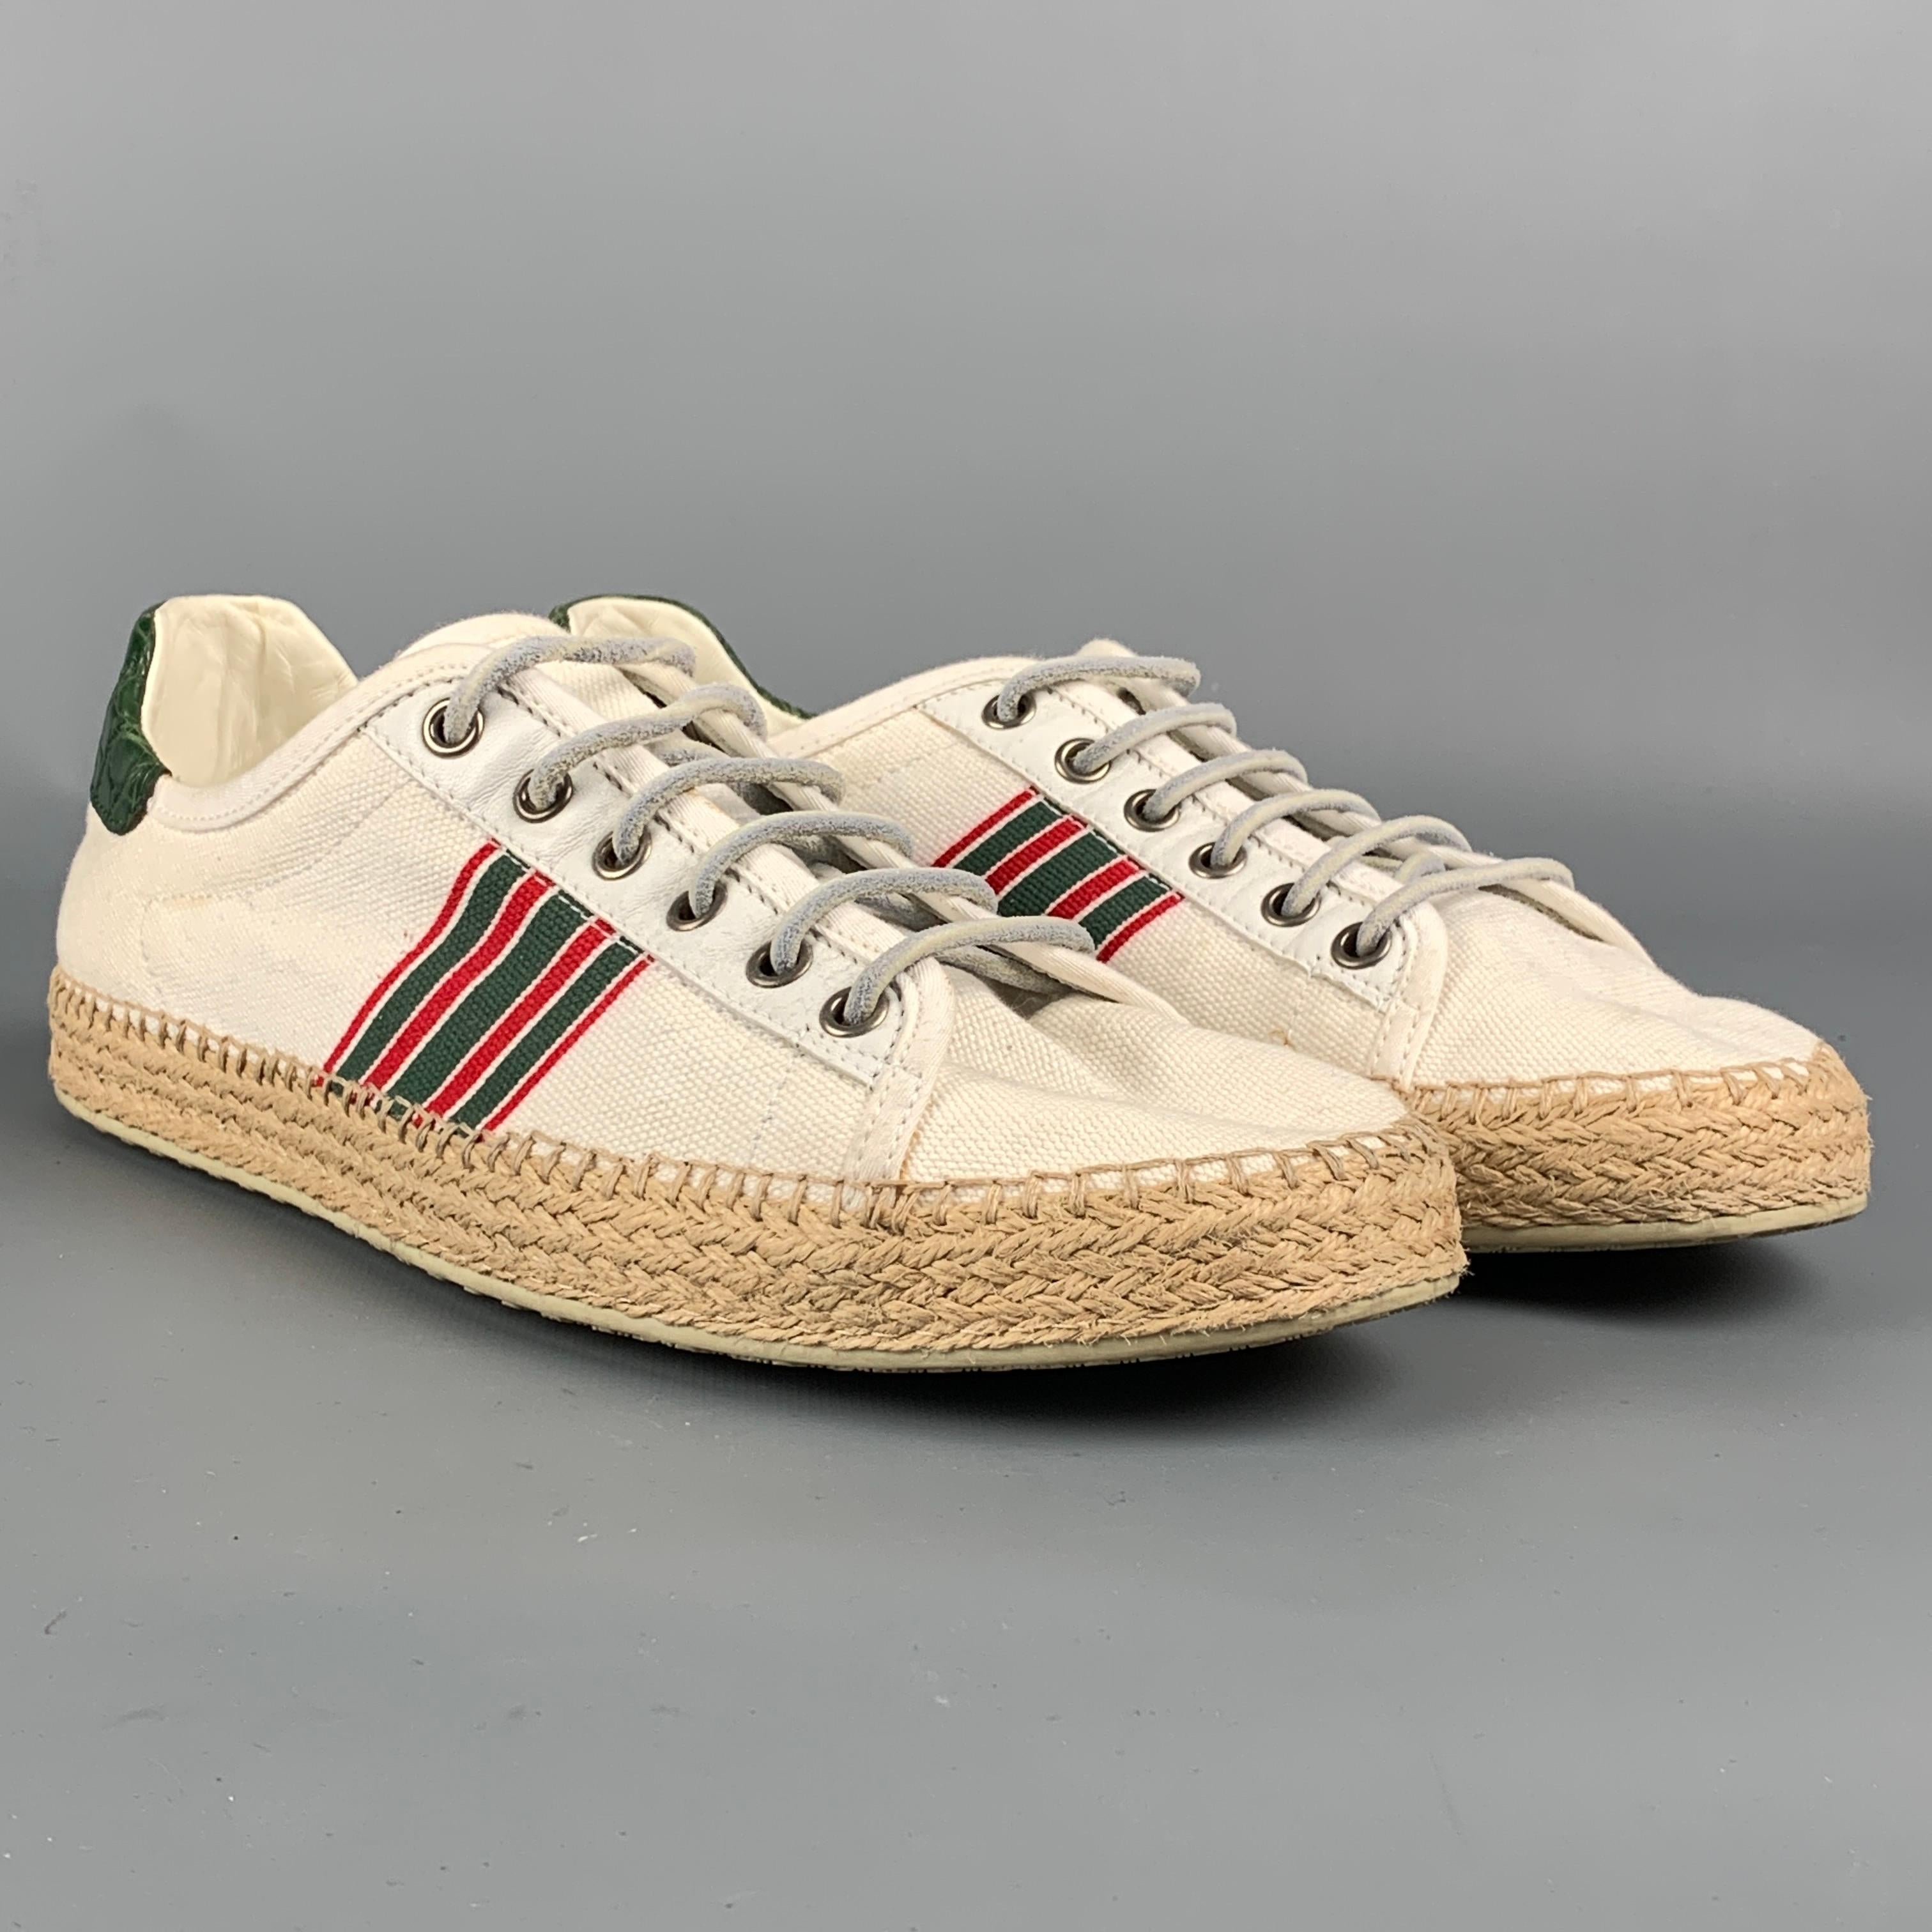 Vintage GUCCI sneakers come in a multi-color canvas featuring espadrille trim, rubber sole, and a lace up closure. Made in Italy. 

Good Pre-Owned Condition.
Marked: 308235 7.5 G

Outsole: 11 in. x 4 in. 